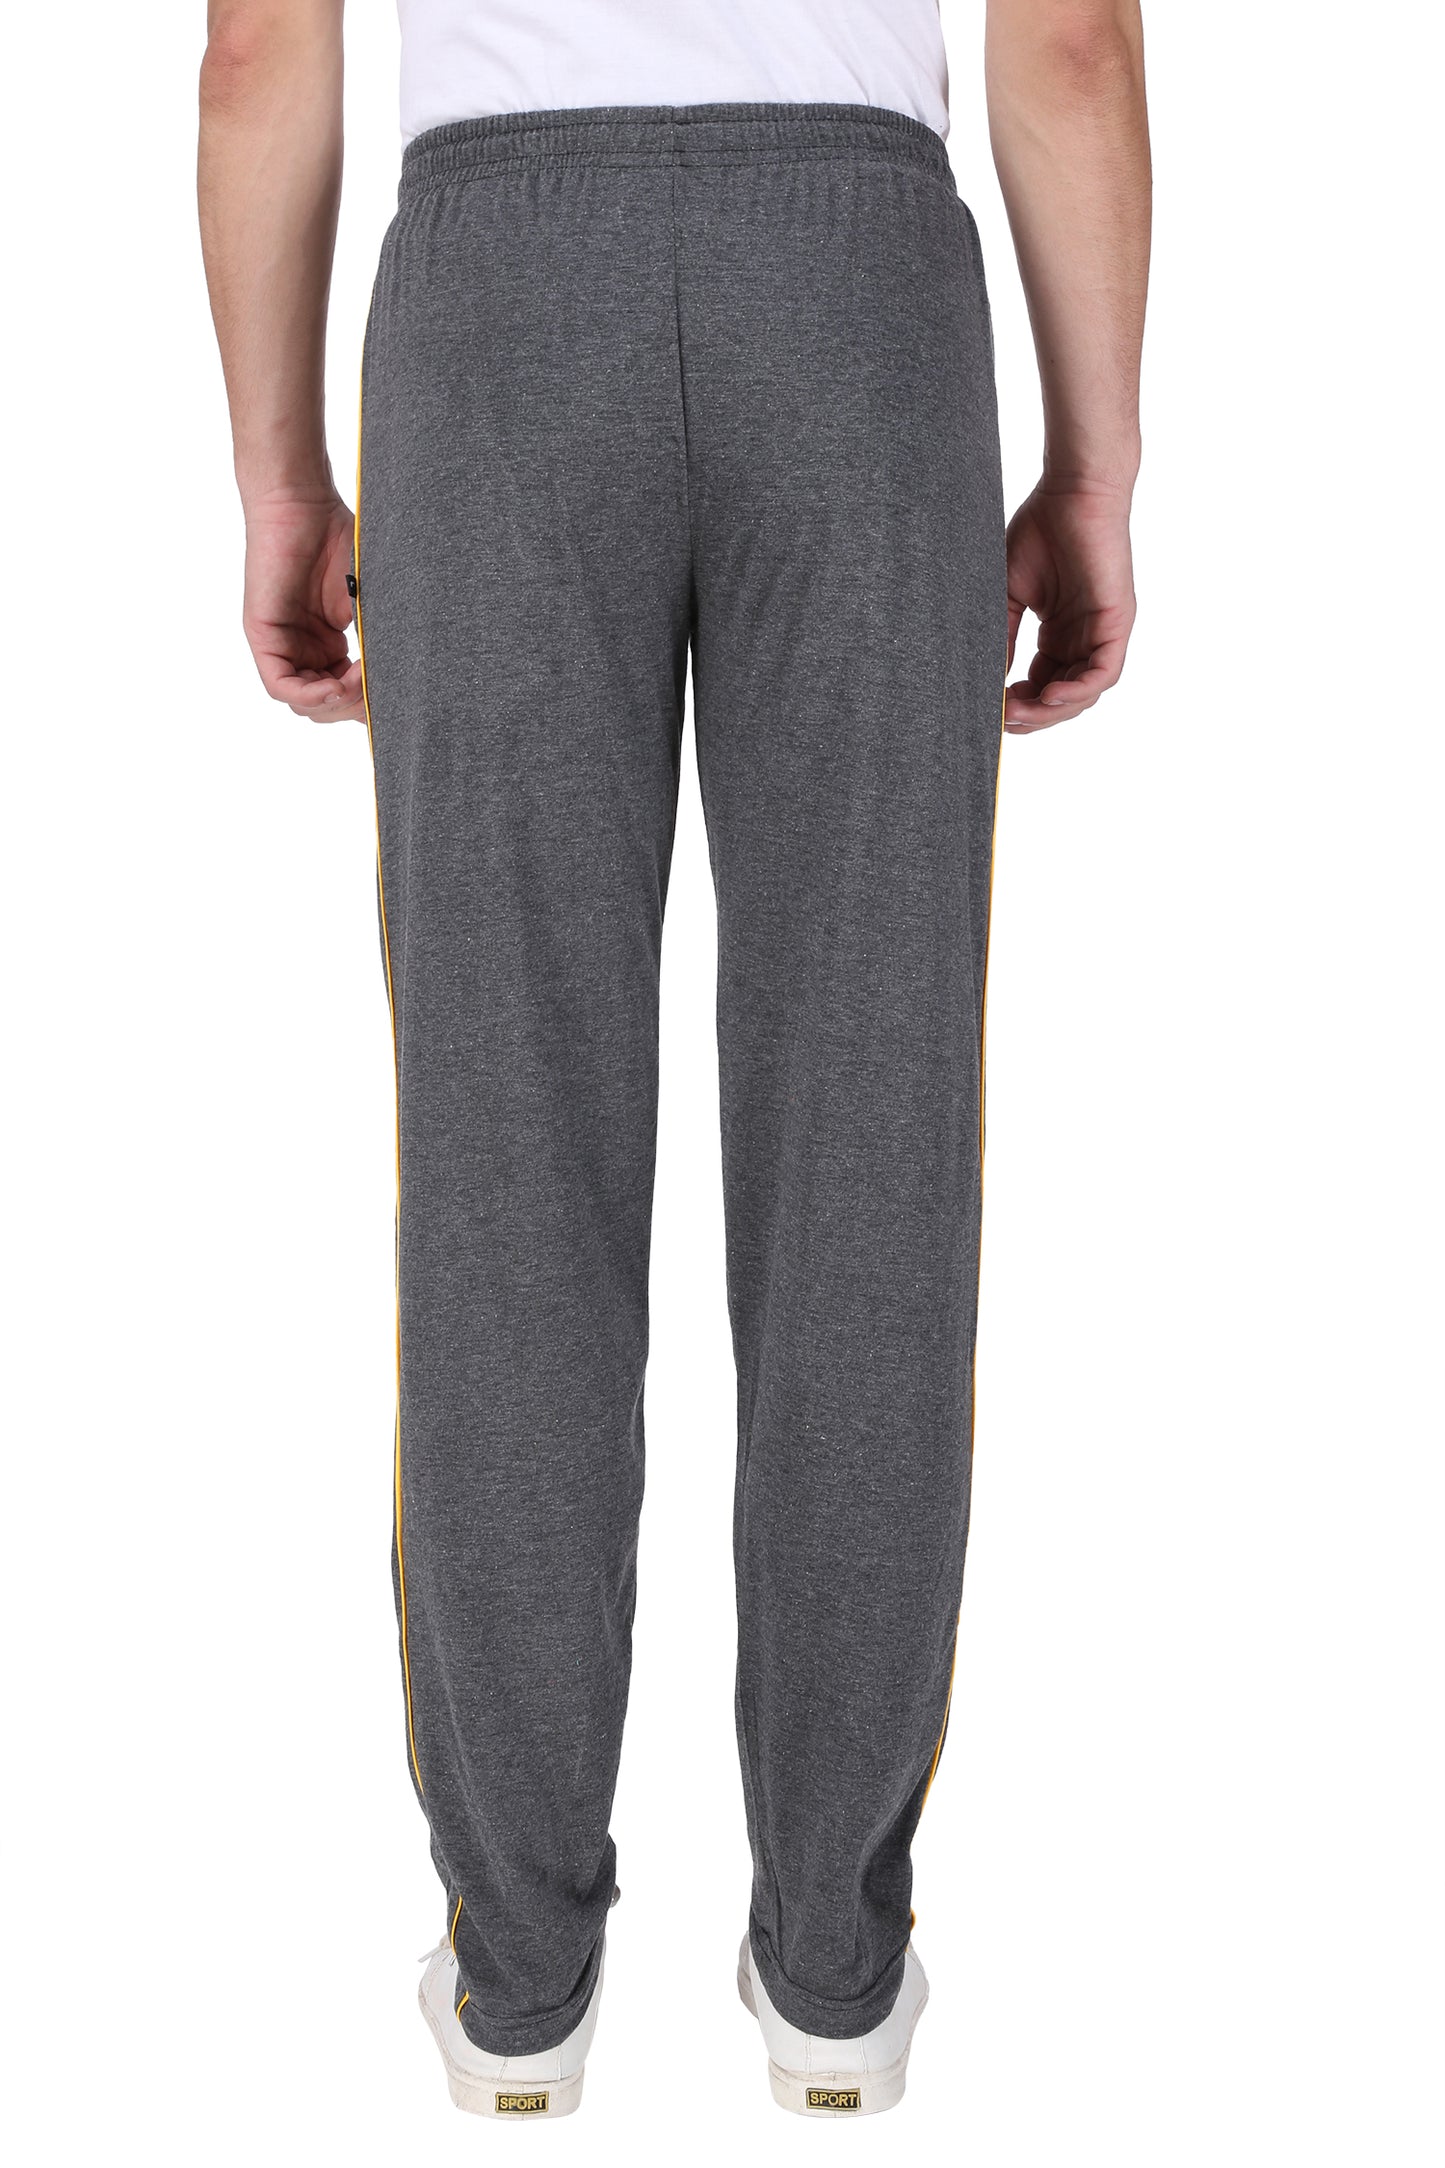 NEO GARMENTS Men's Cotton TRACK PANTS | CARBON | SIZES FROM M TO 9XL.